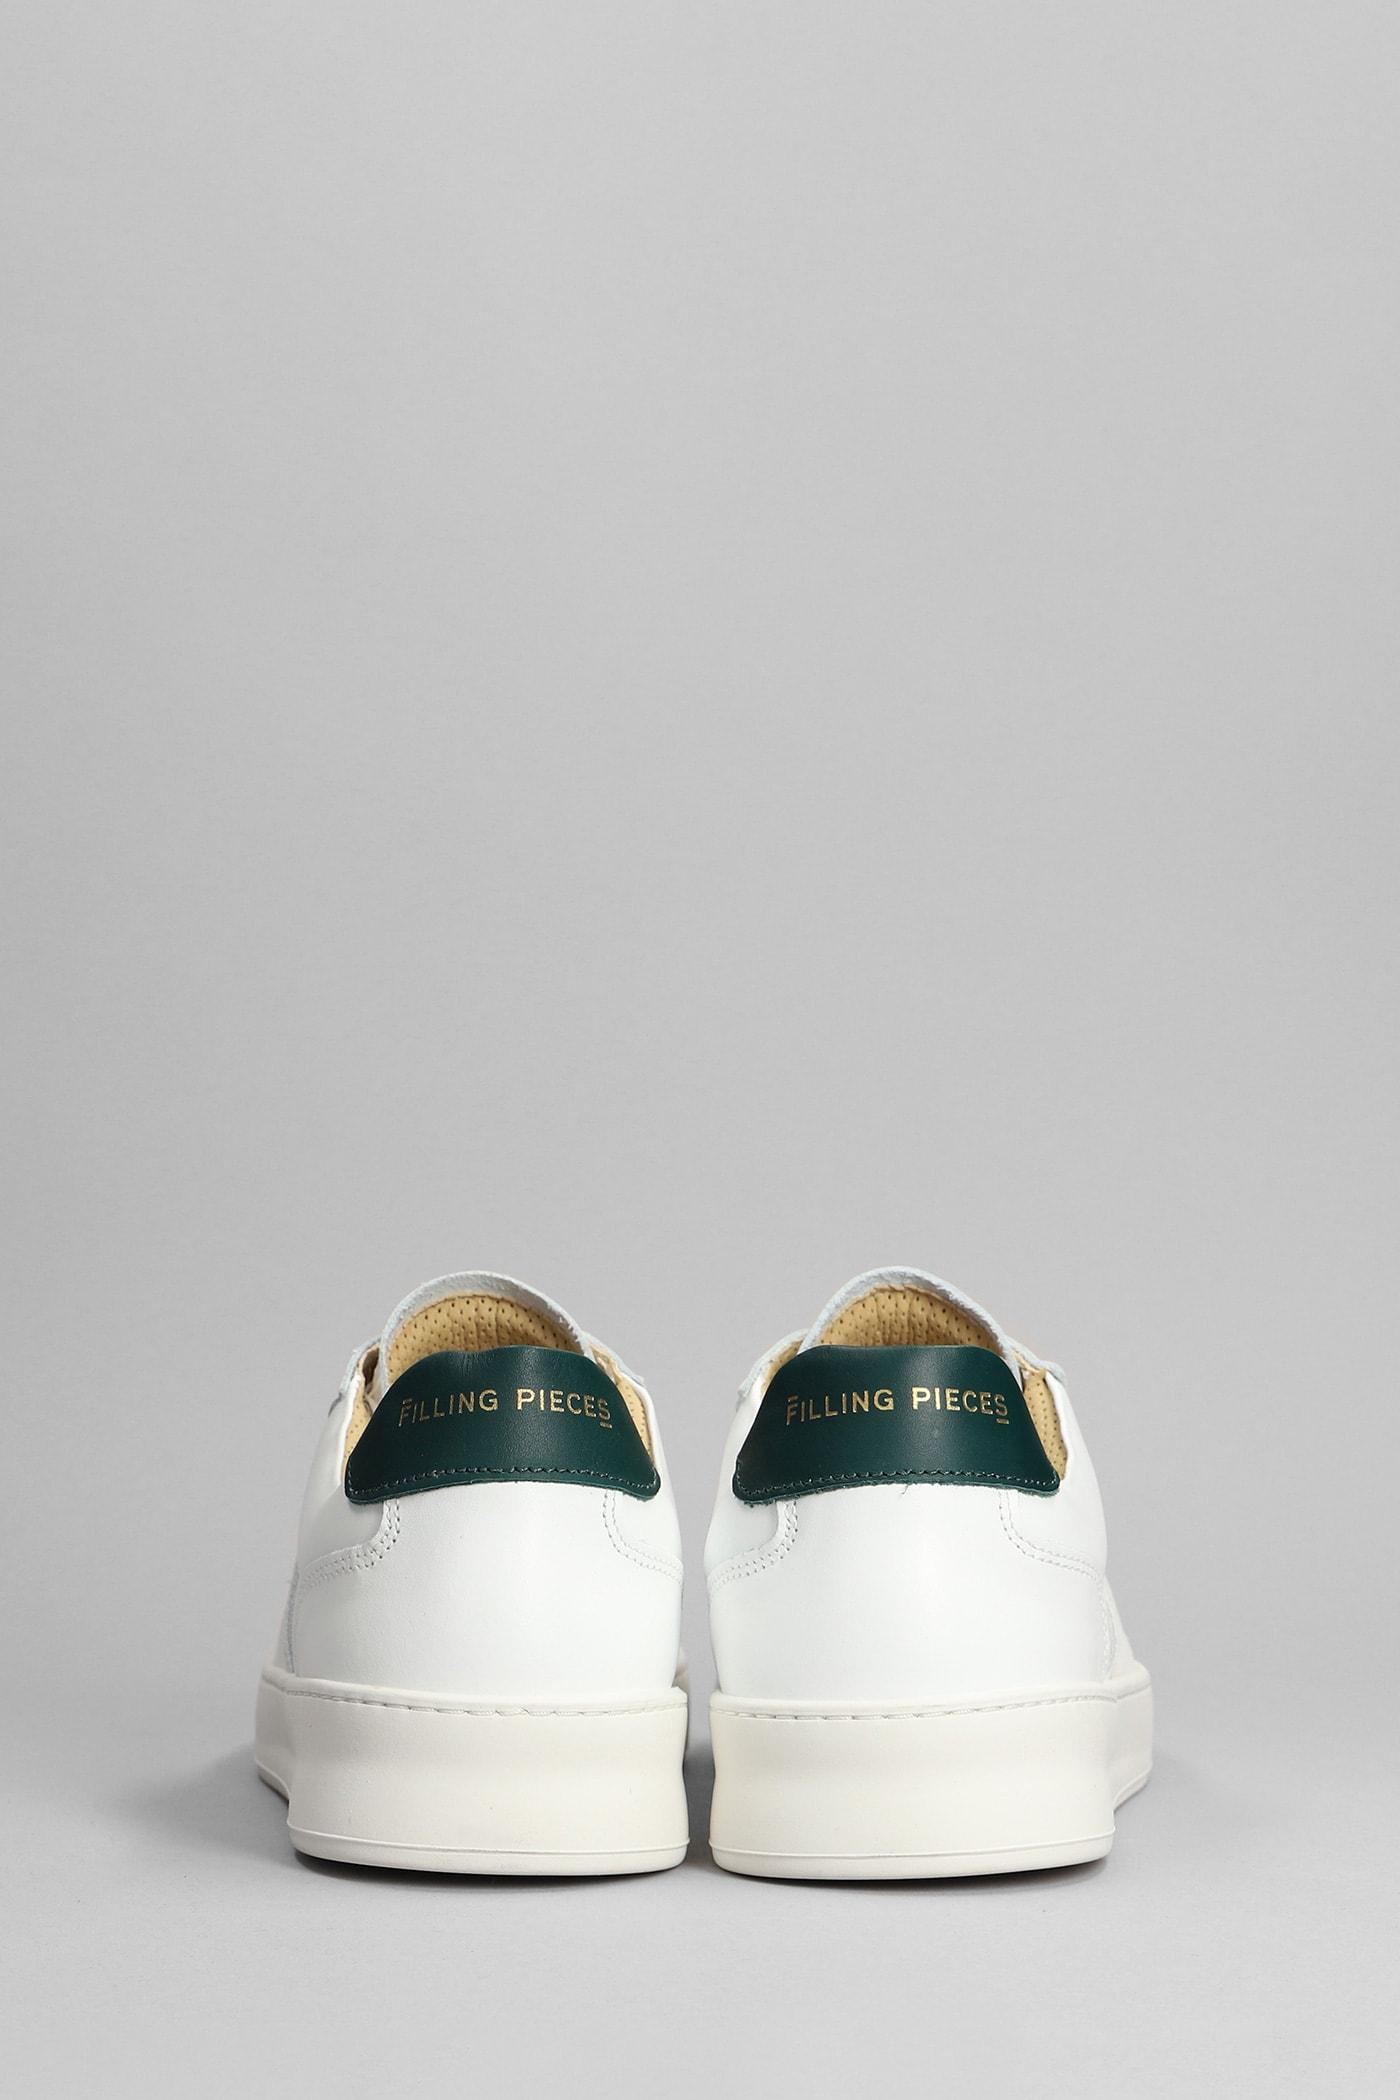 Filling Pieces Mondo Squash Sneakers In White Leather for Men | Lyst